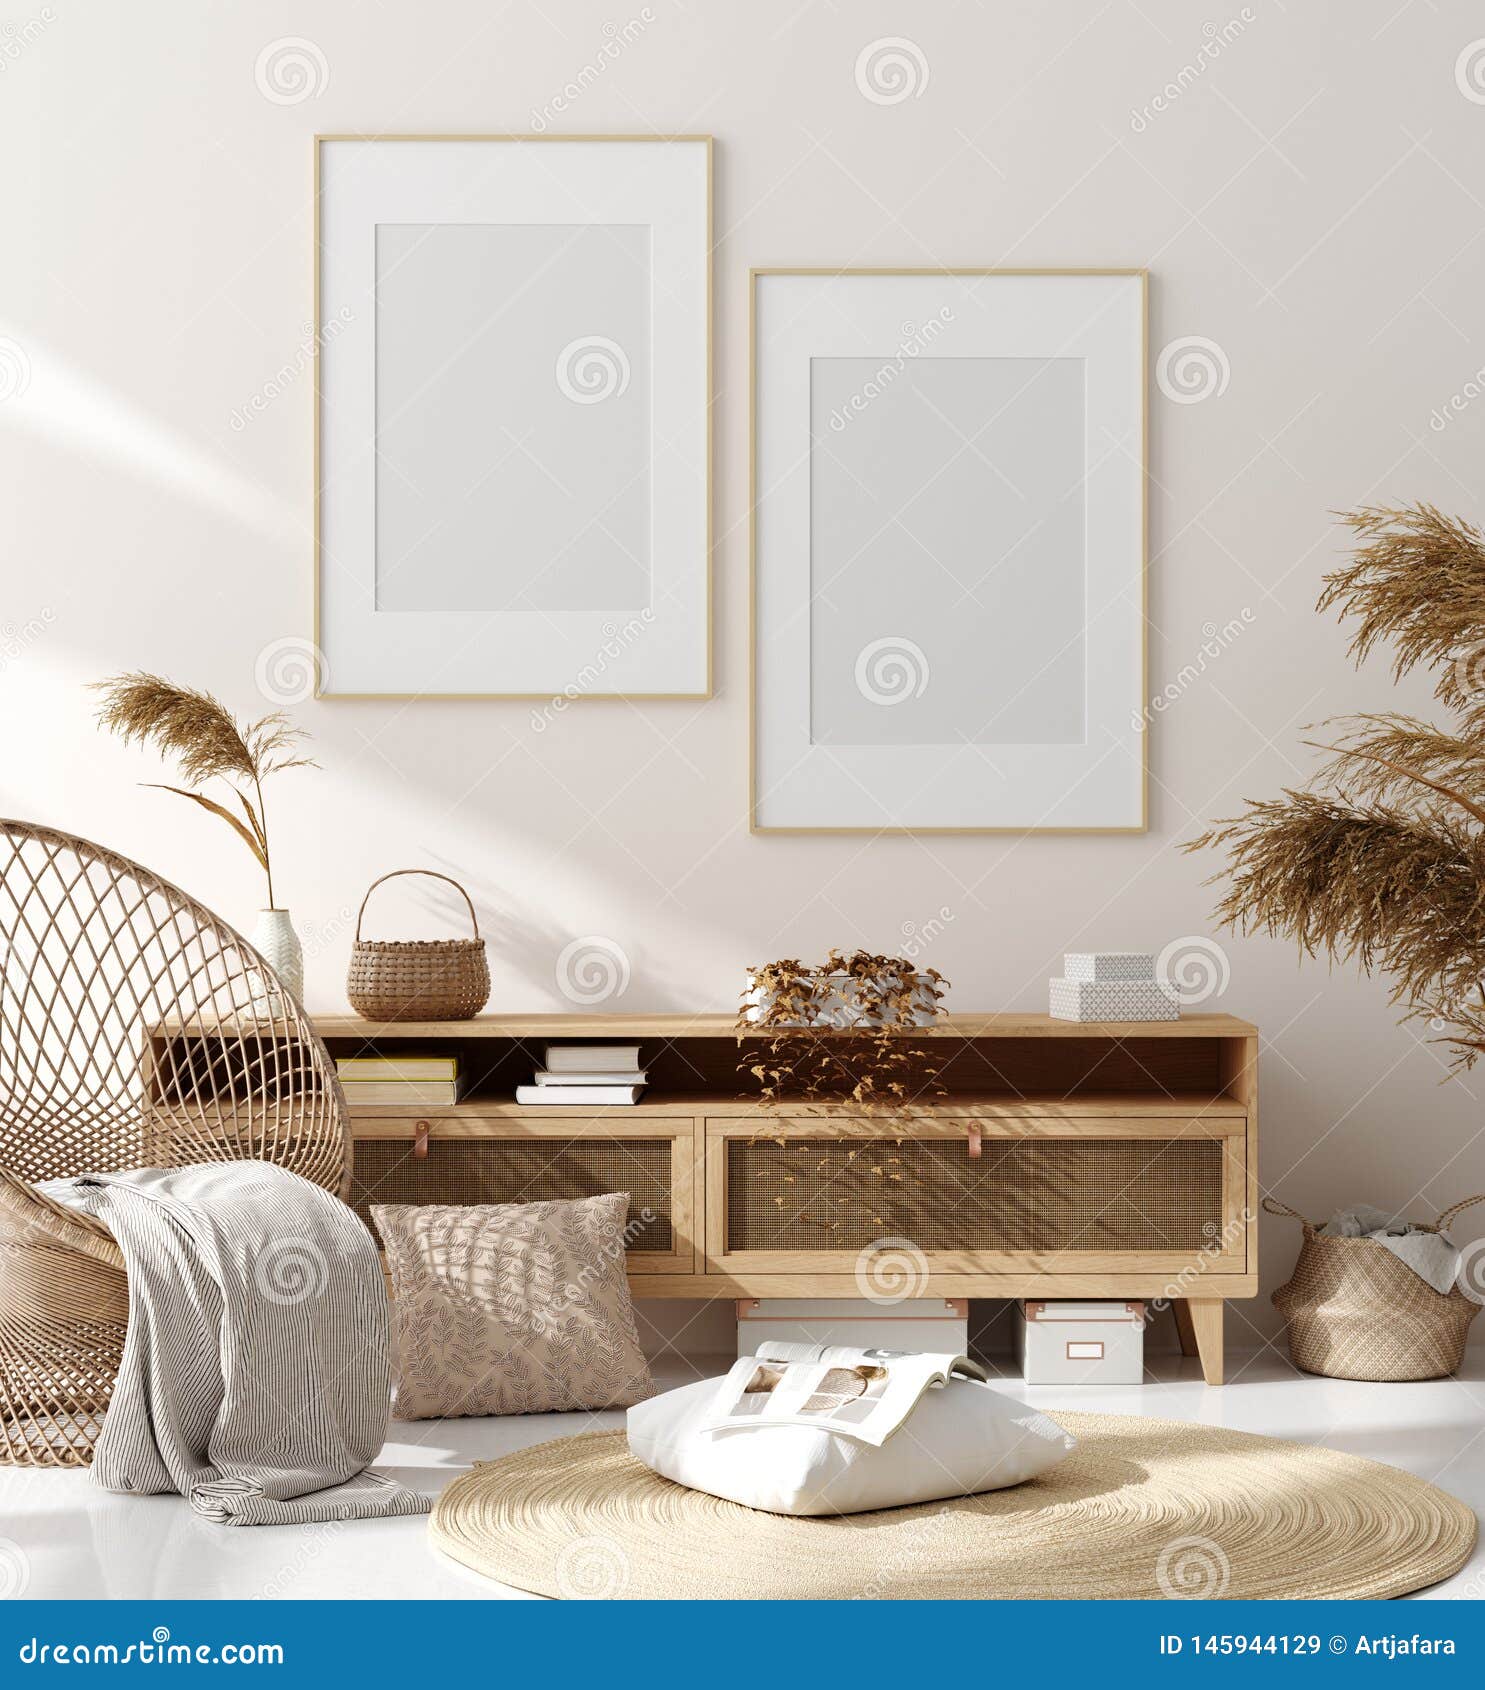 mock up frame in home interior background, beige room with natural wooden furniture, scandinavian style